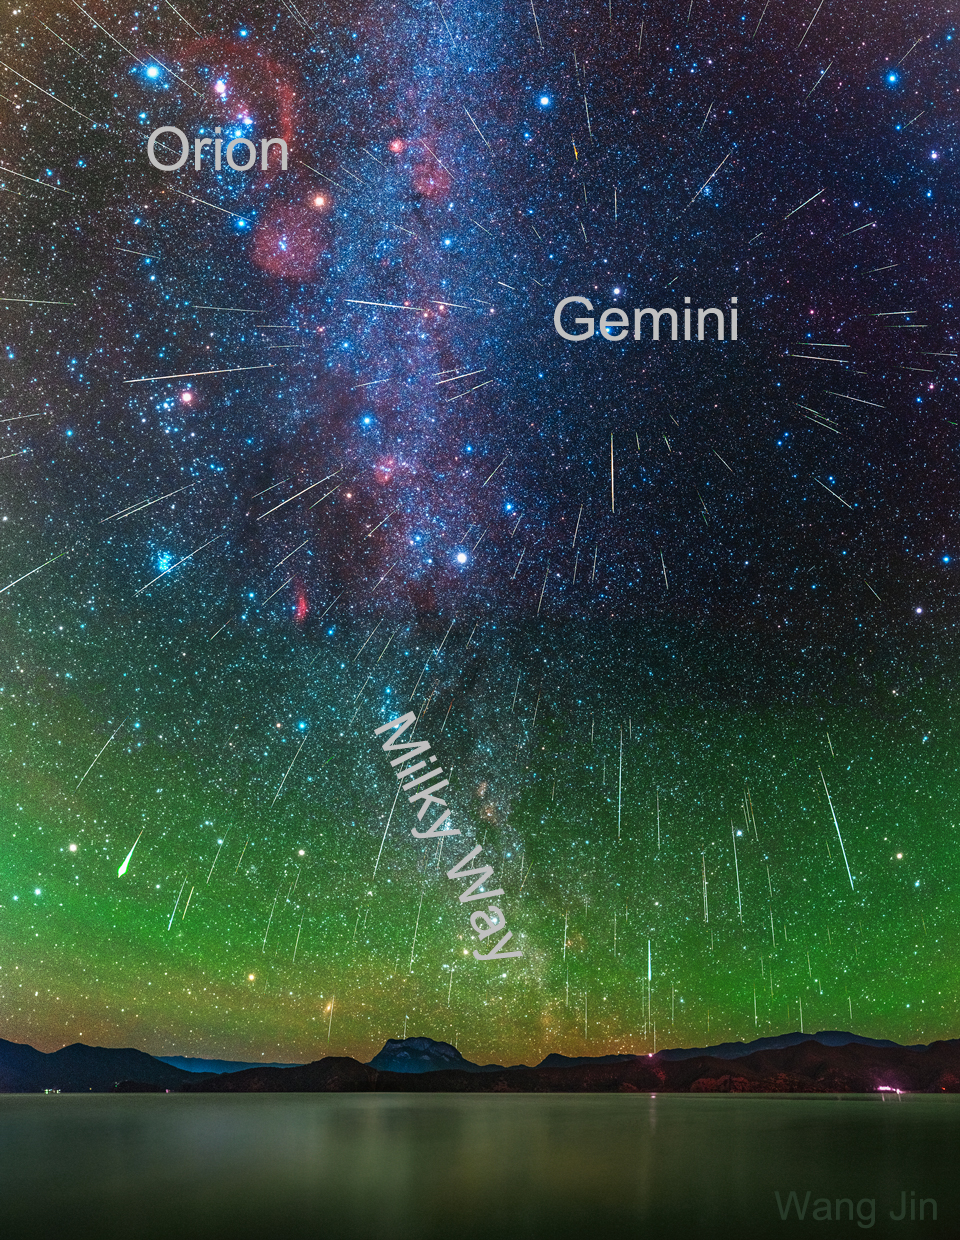 The picture shows a composite of over 200 Geminid meteors
from the 2020 Geminids meteor shower over Lake Lugu in Yunnan, China.
Please see the explanation for more detailed information.